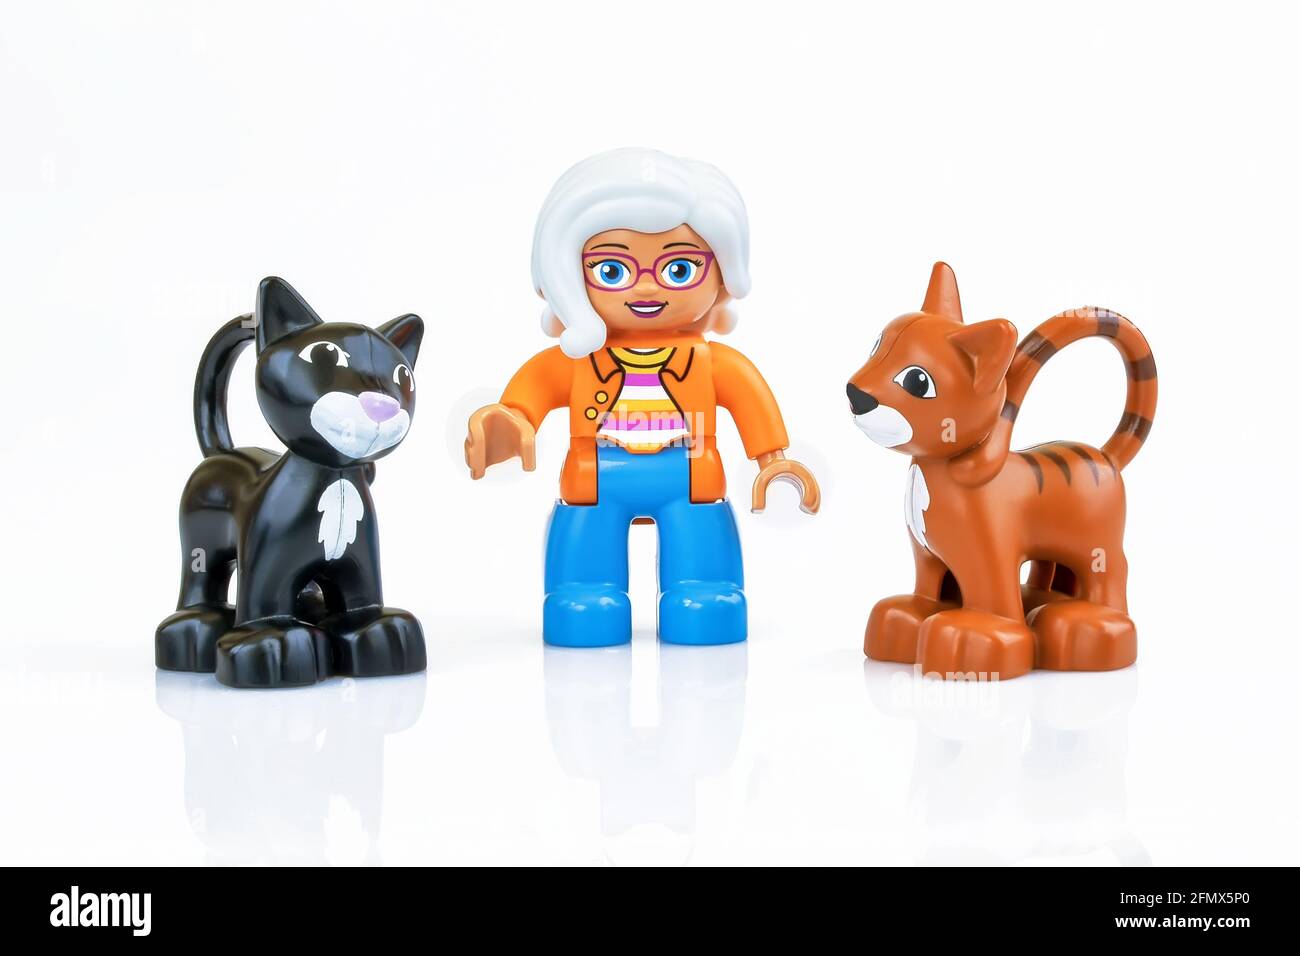 KHARKIV, UKRAINE - March 29th, 2020: Toy old lady with two toy cats, plastic toys, pre-school education theme, isolated on white Stock Photo